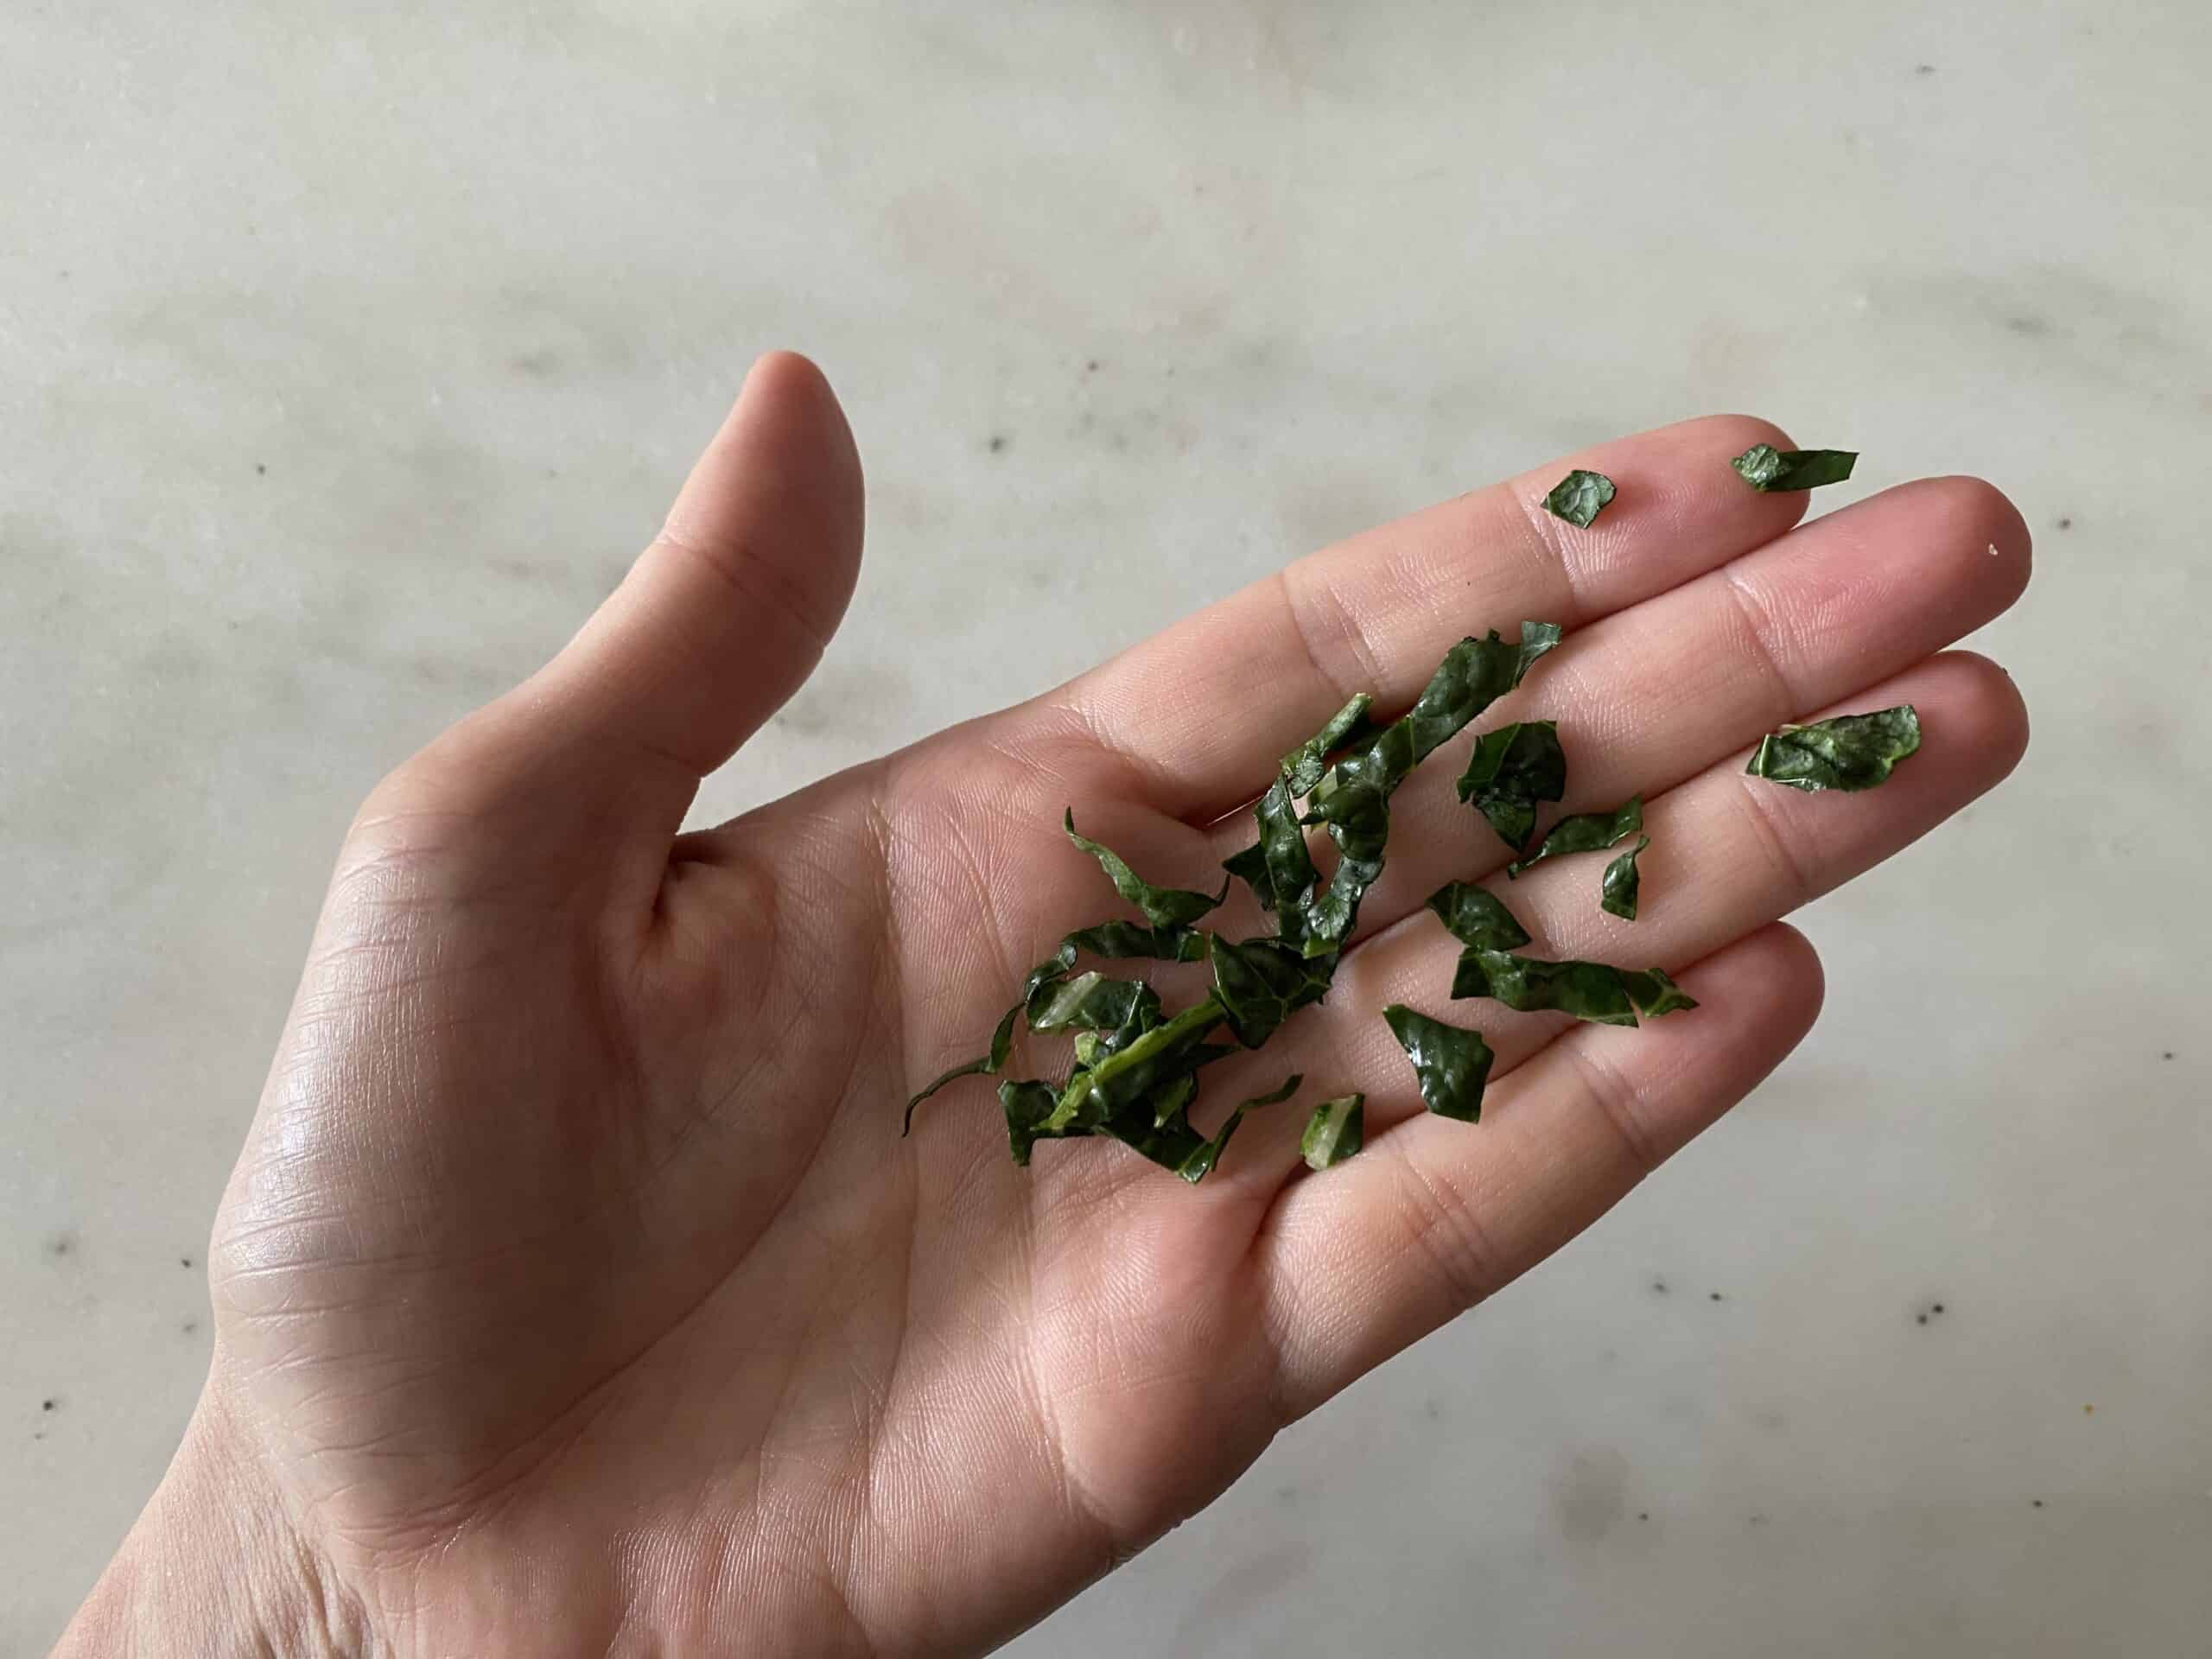 a hand holding shredded kale pieces for babies starting solids